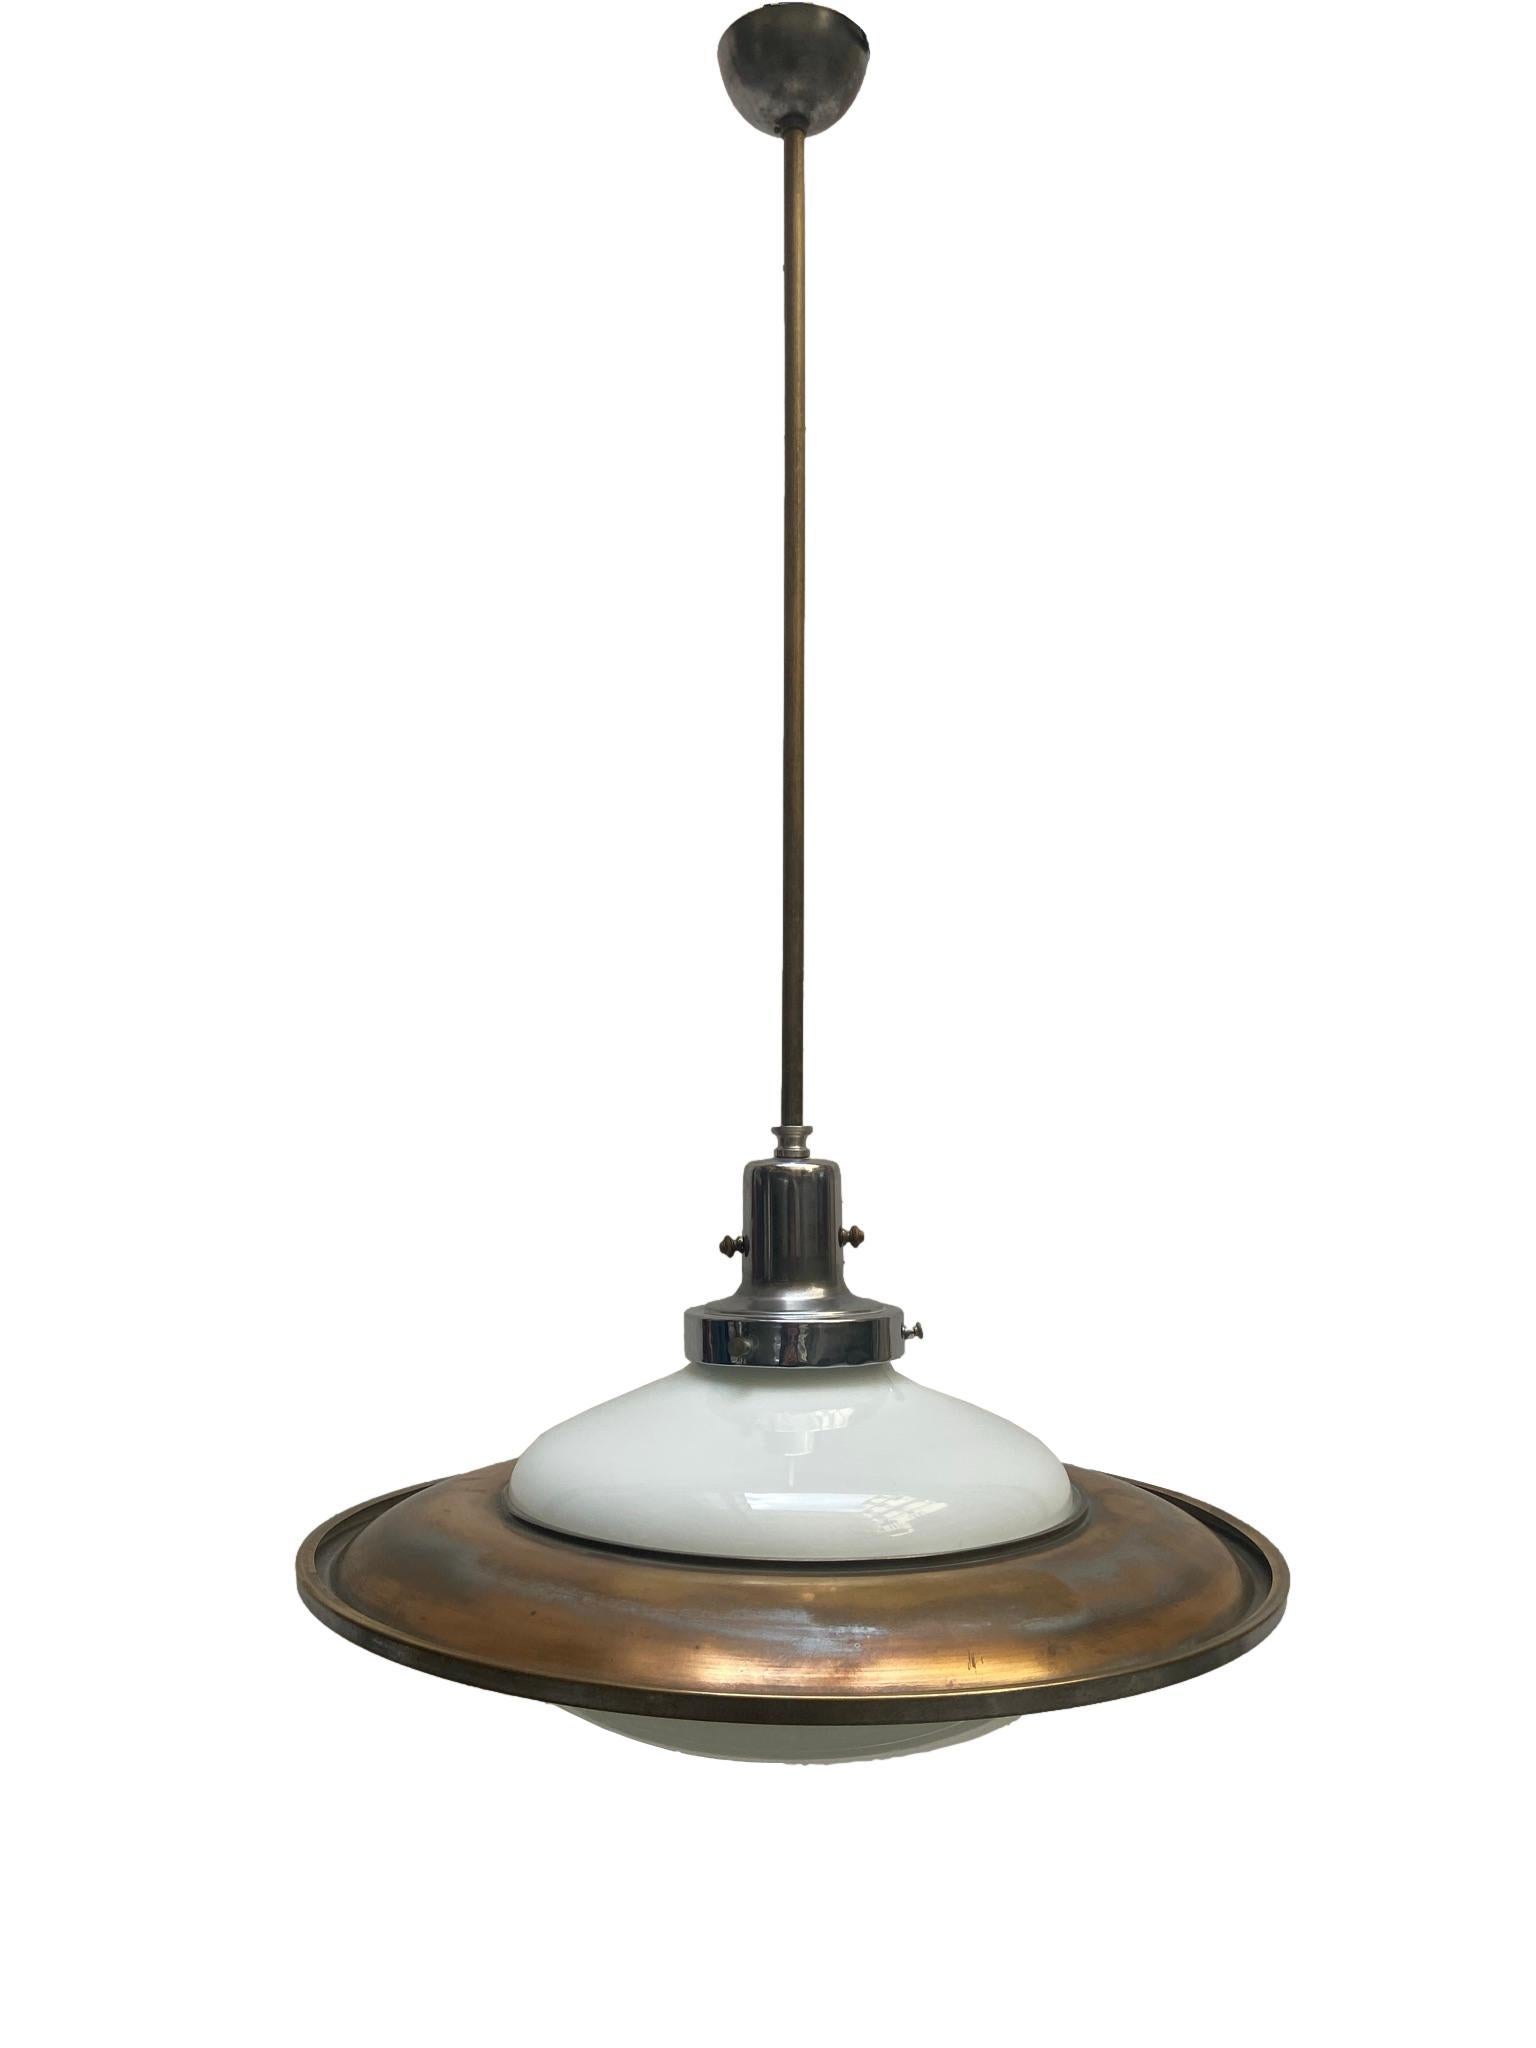 Mid-Century Modern Gino Sarfatti Attributed Rare Chandelier, Italy, 1950s For Sale